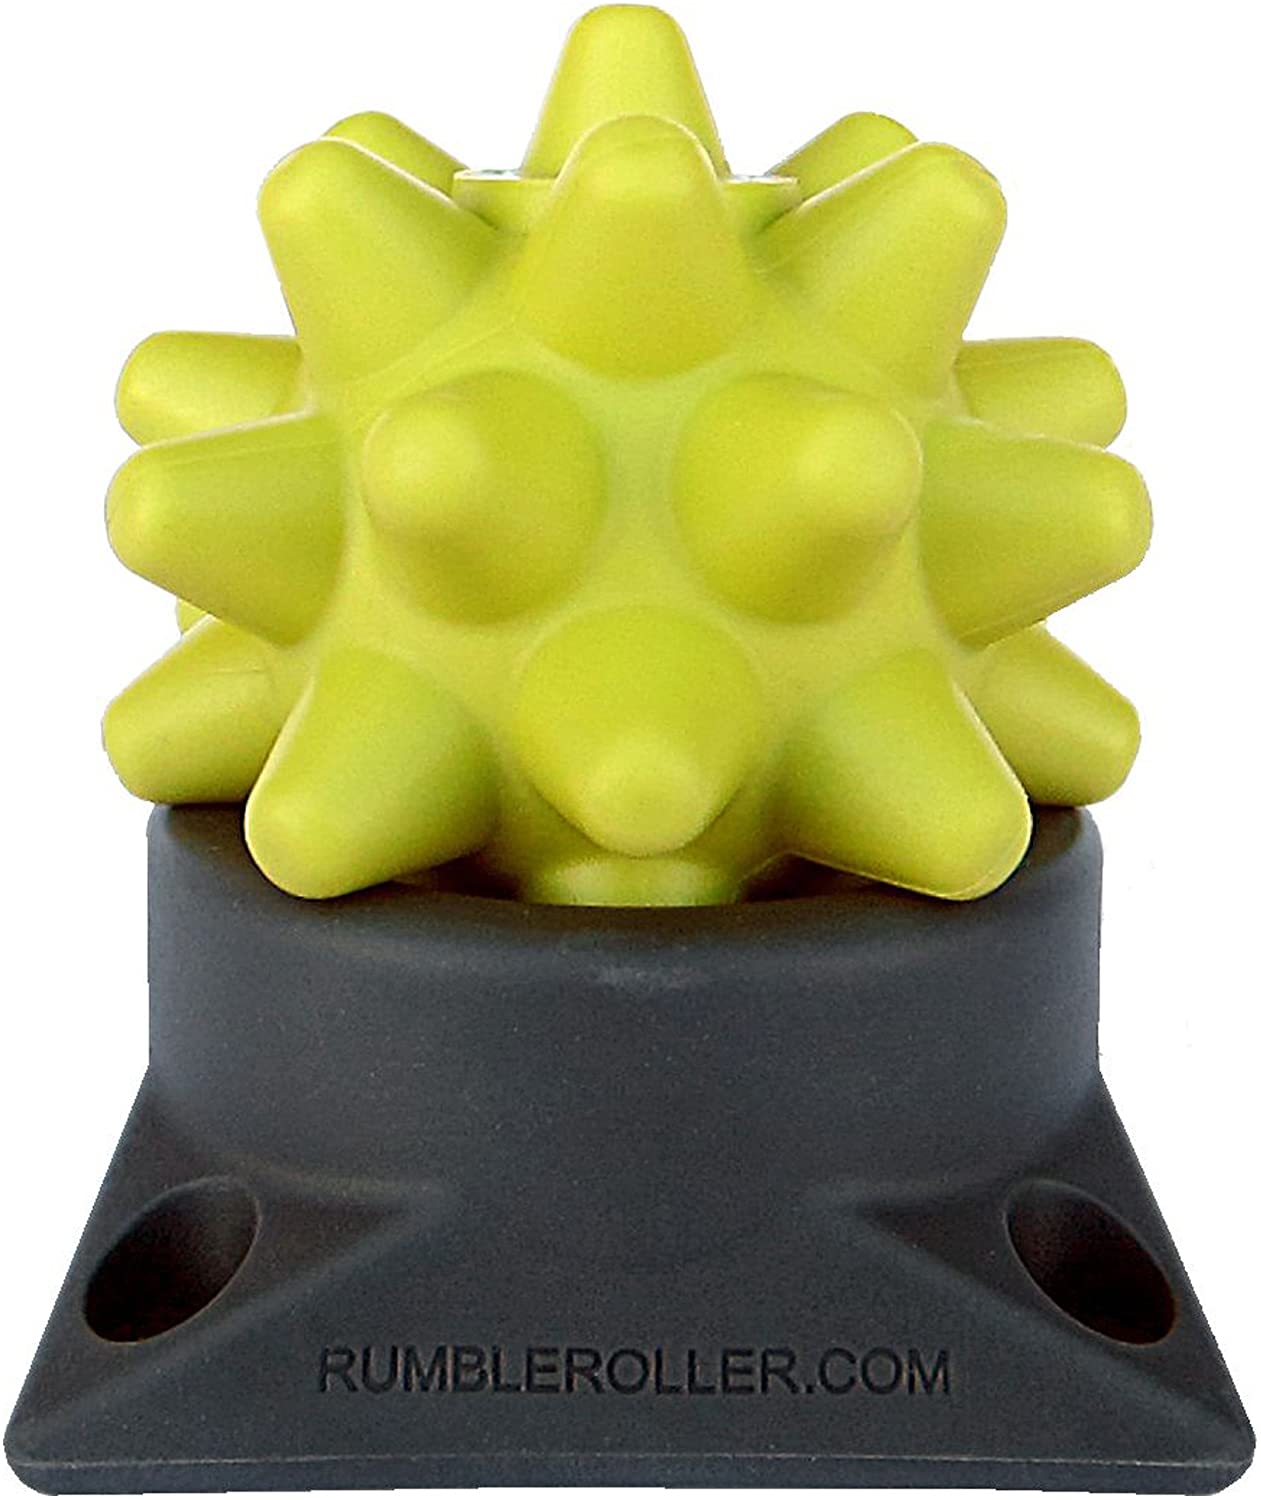 Rumble Roller Beastie Massage Ball & Base - Xtra Firm - Buy now online with delivery in 1-2 days in UAE, Dubai, Abu-Dhabi.